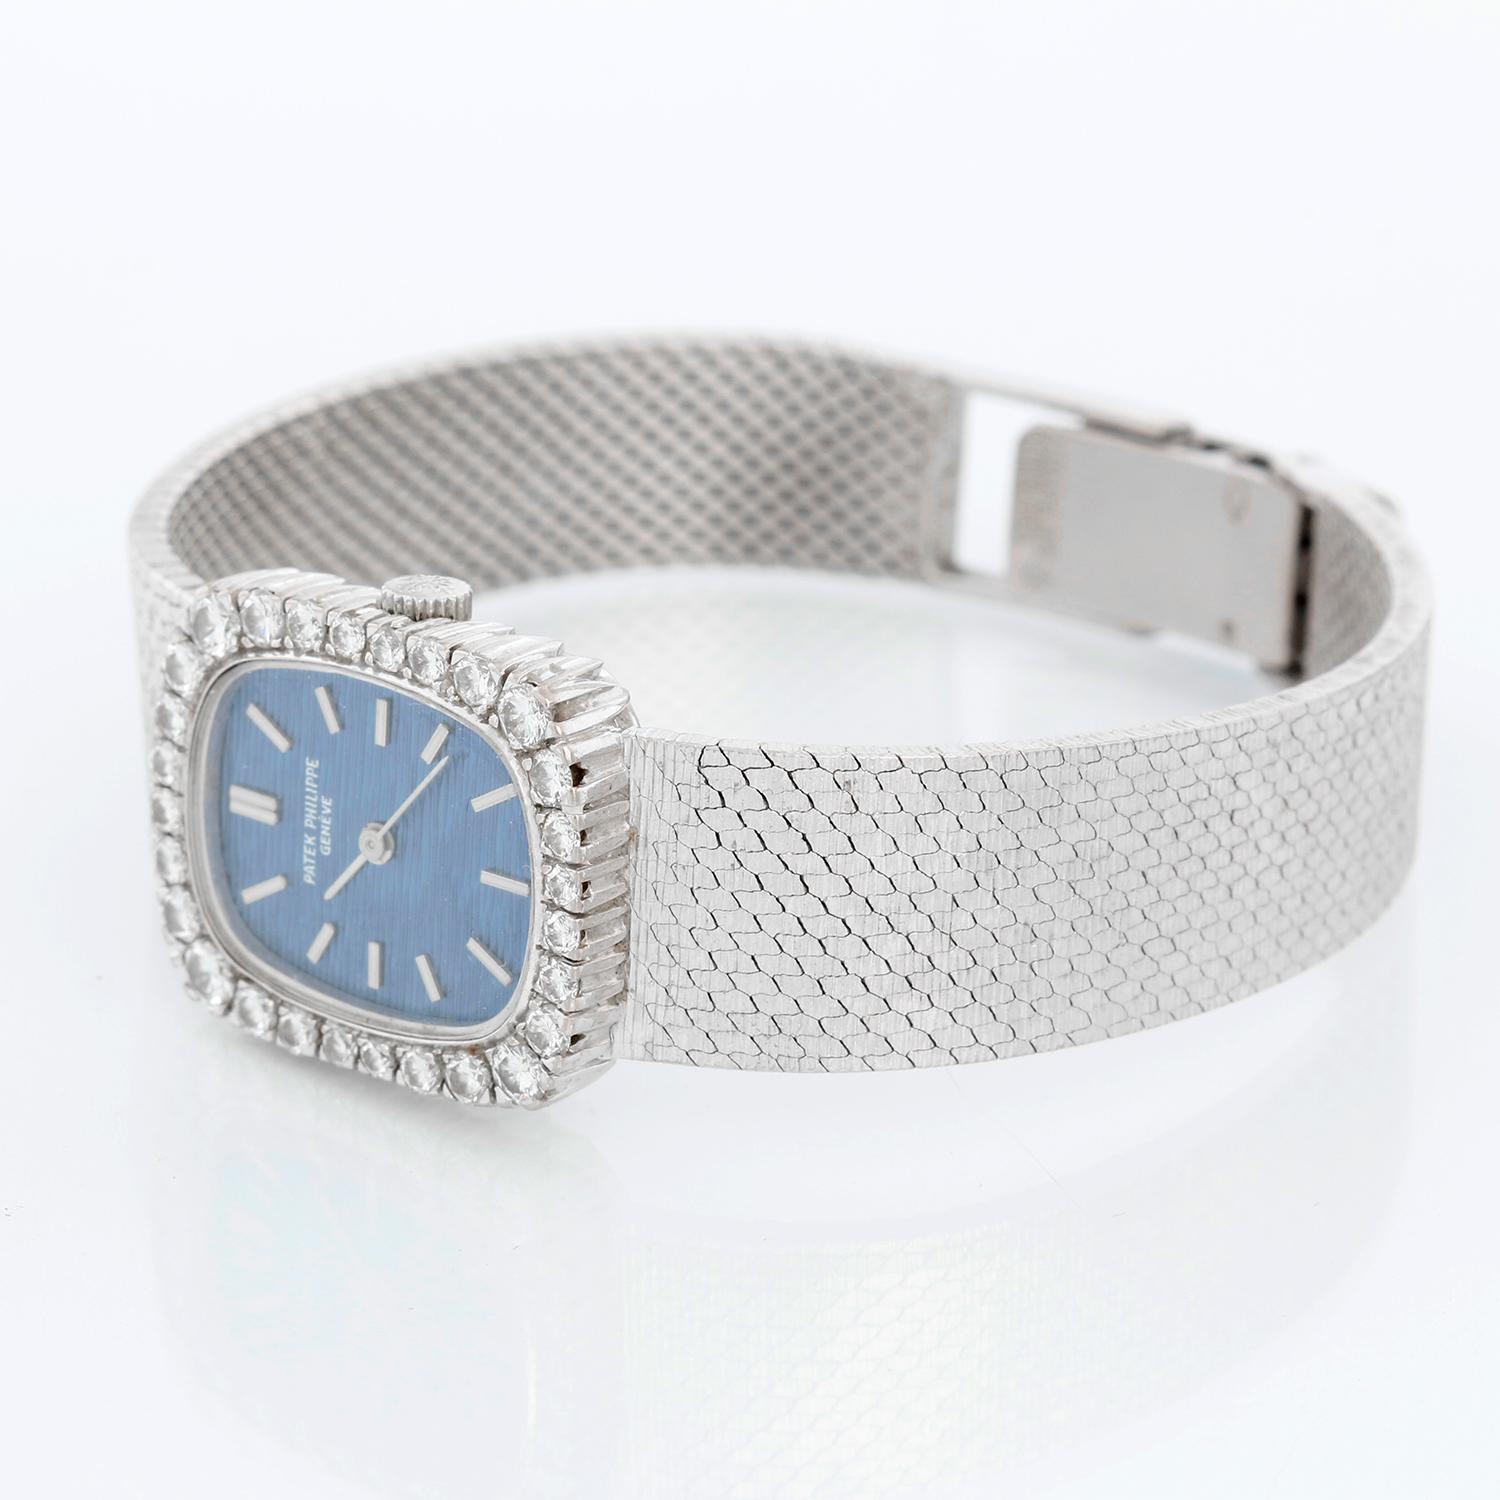 Patek Philippe 18k White Gold  Ellipse Men's Watch Ref. 4102 - Manual. 18k white gold case (18mm x 22mm). Textured blue dial . Patek Philippe & Co. 18K white gold bracelet; will fit a 6 inch wrist . Pre-owned with Patek Philippe  box.